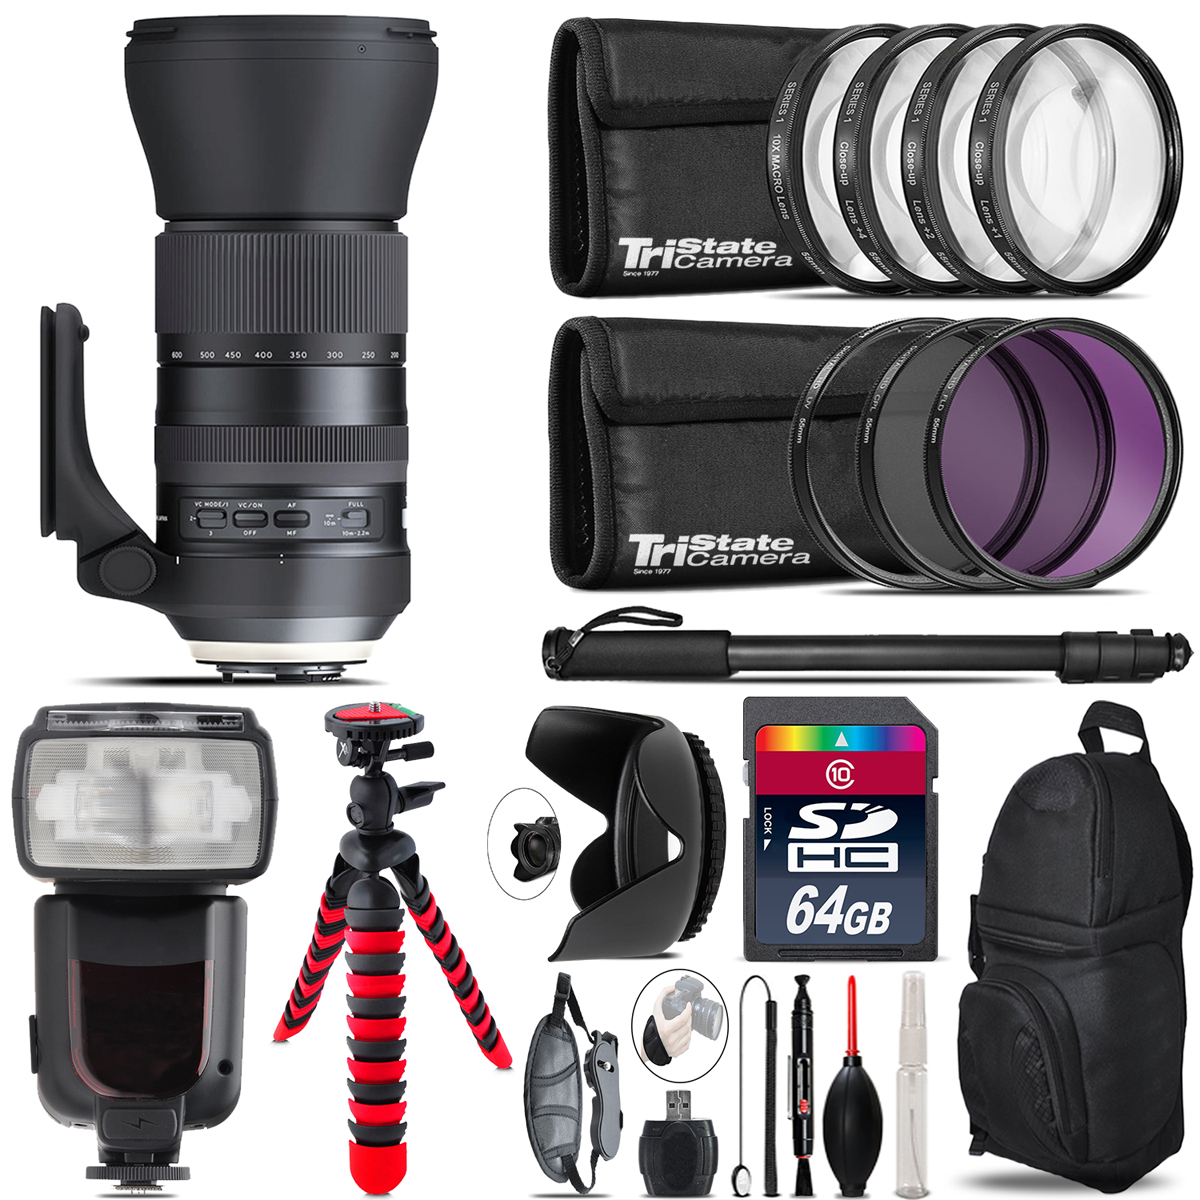 150-600mm G2 for Nikon + Professional Flash & More - 64GB Accessory Kit *FREE SHIPPING*